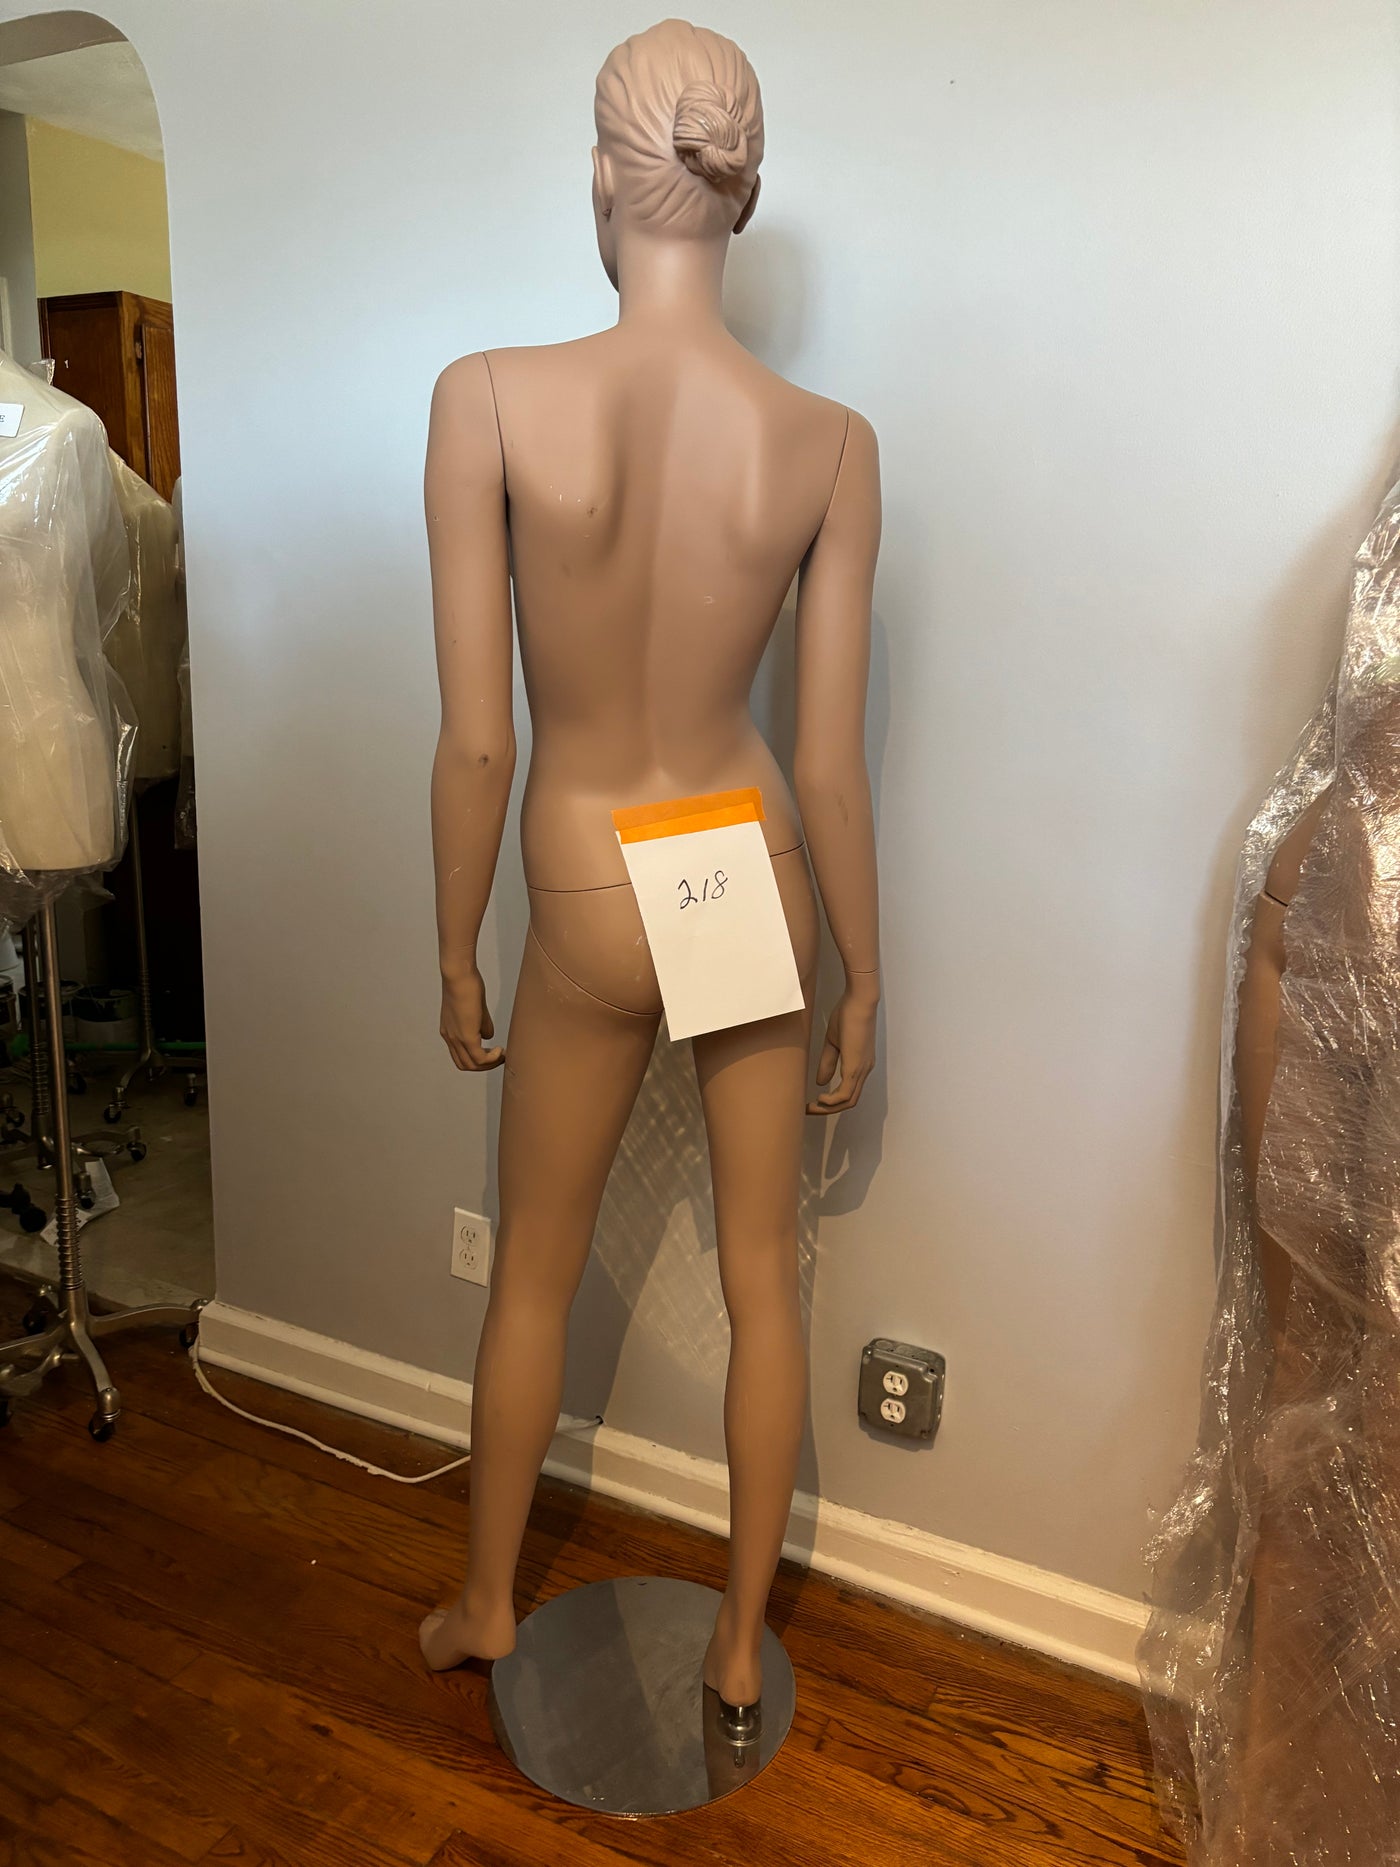 Used Female Adel Rootstein Mannequin  #218 Girl Thing